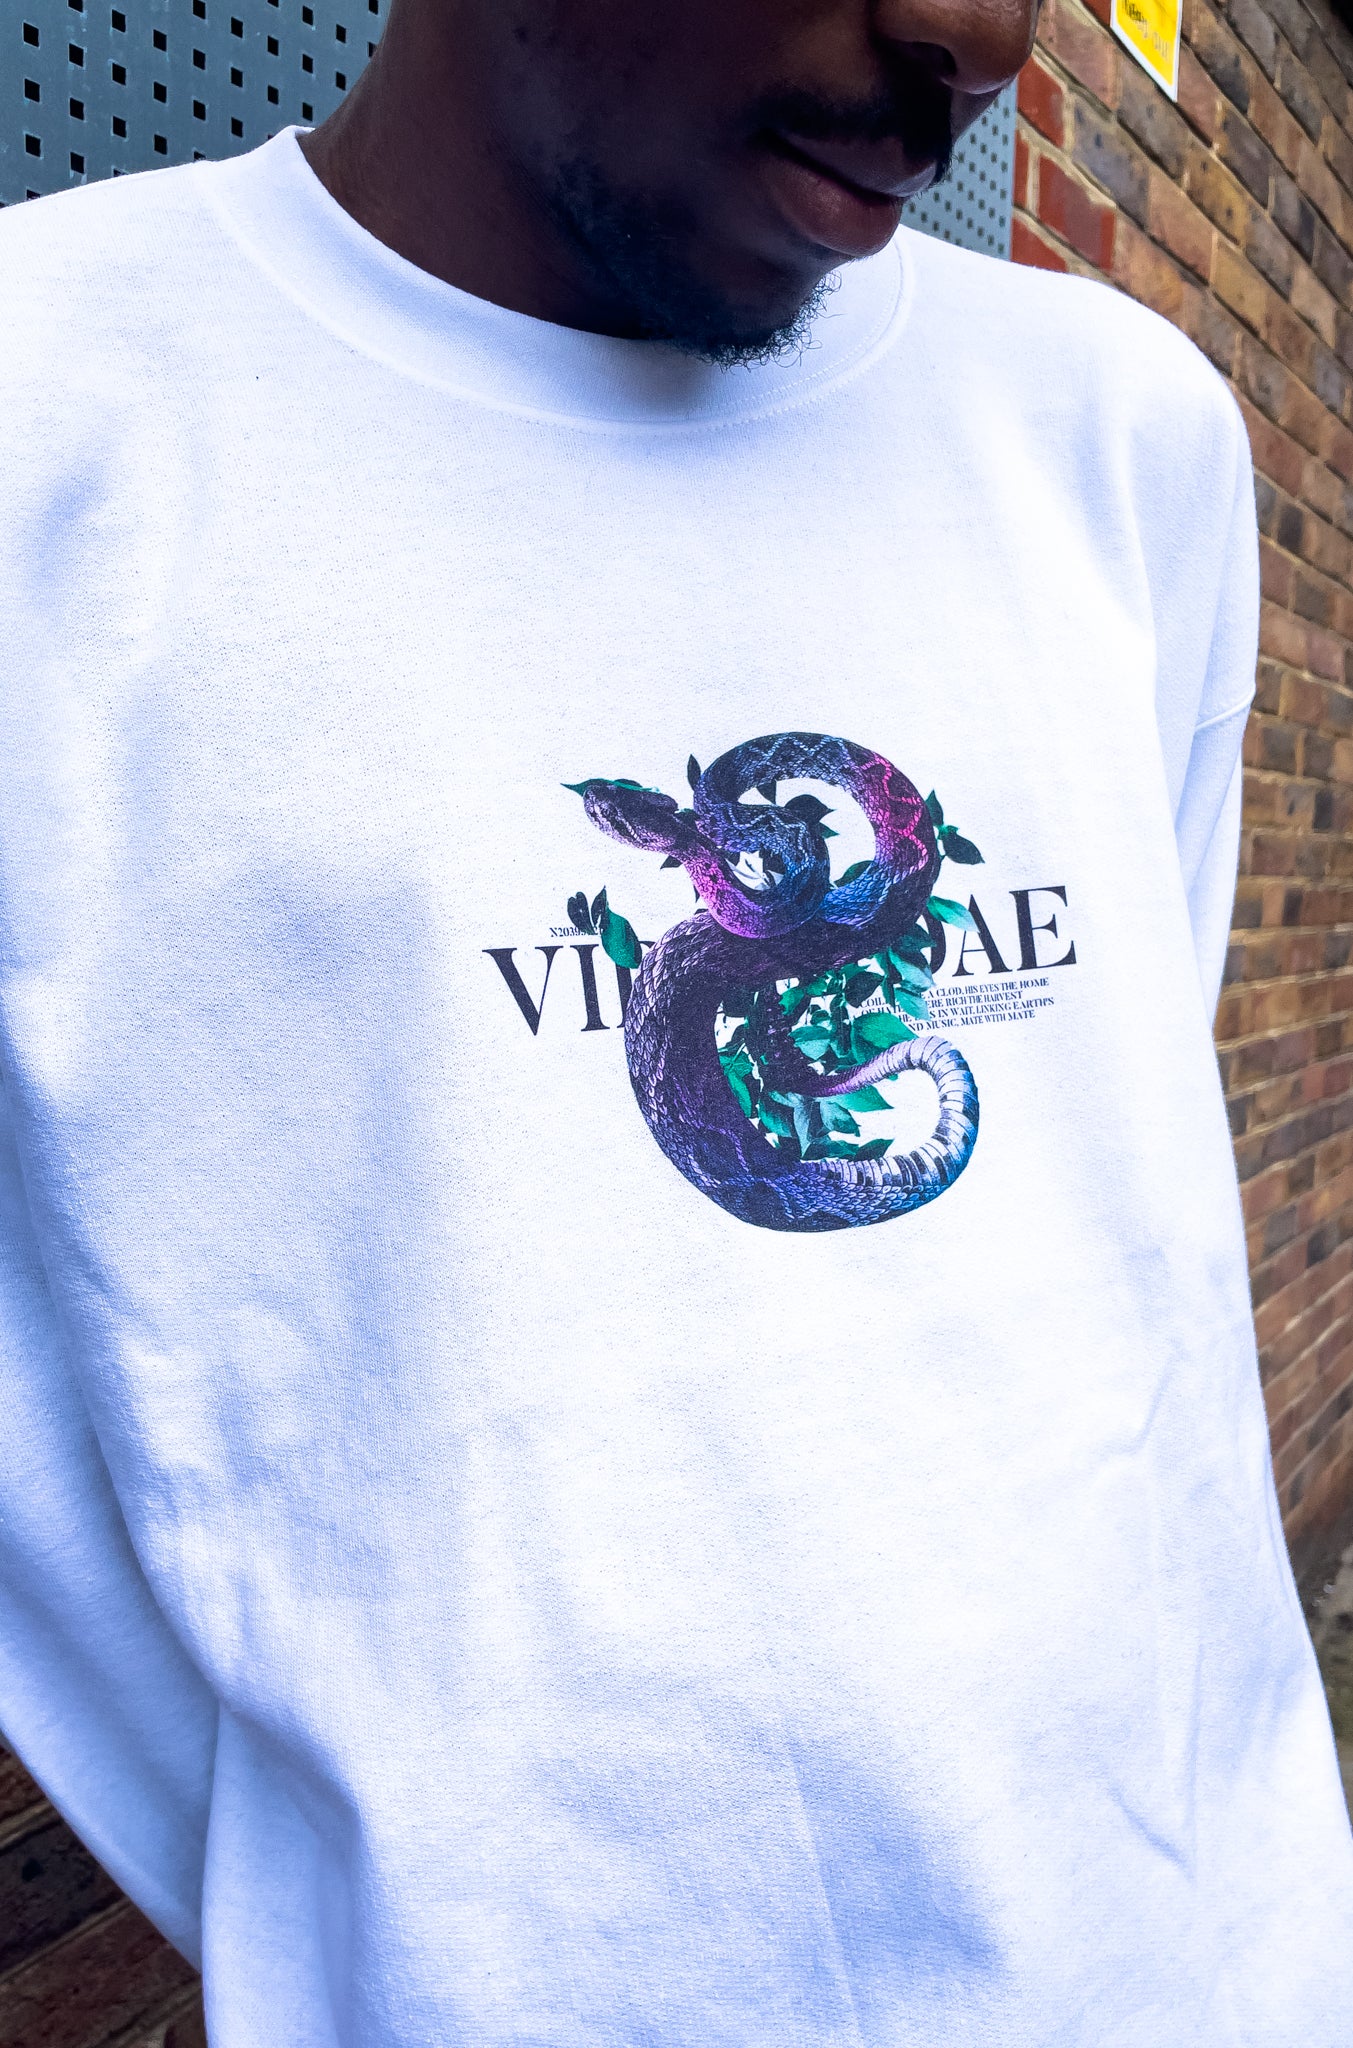 New VIPERIDAE Jumper Front and Back design. AW21 Collection - STiTCH.LDN